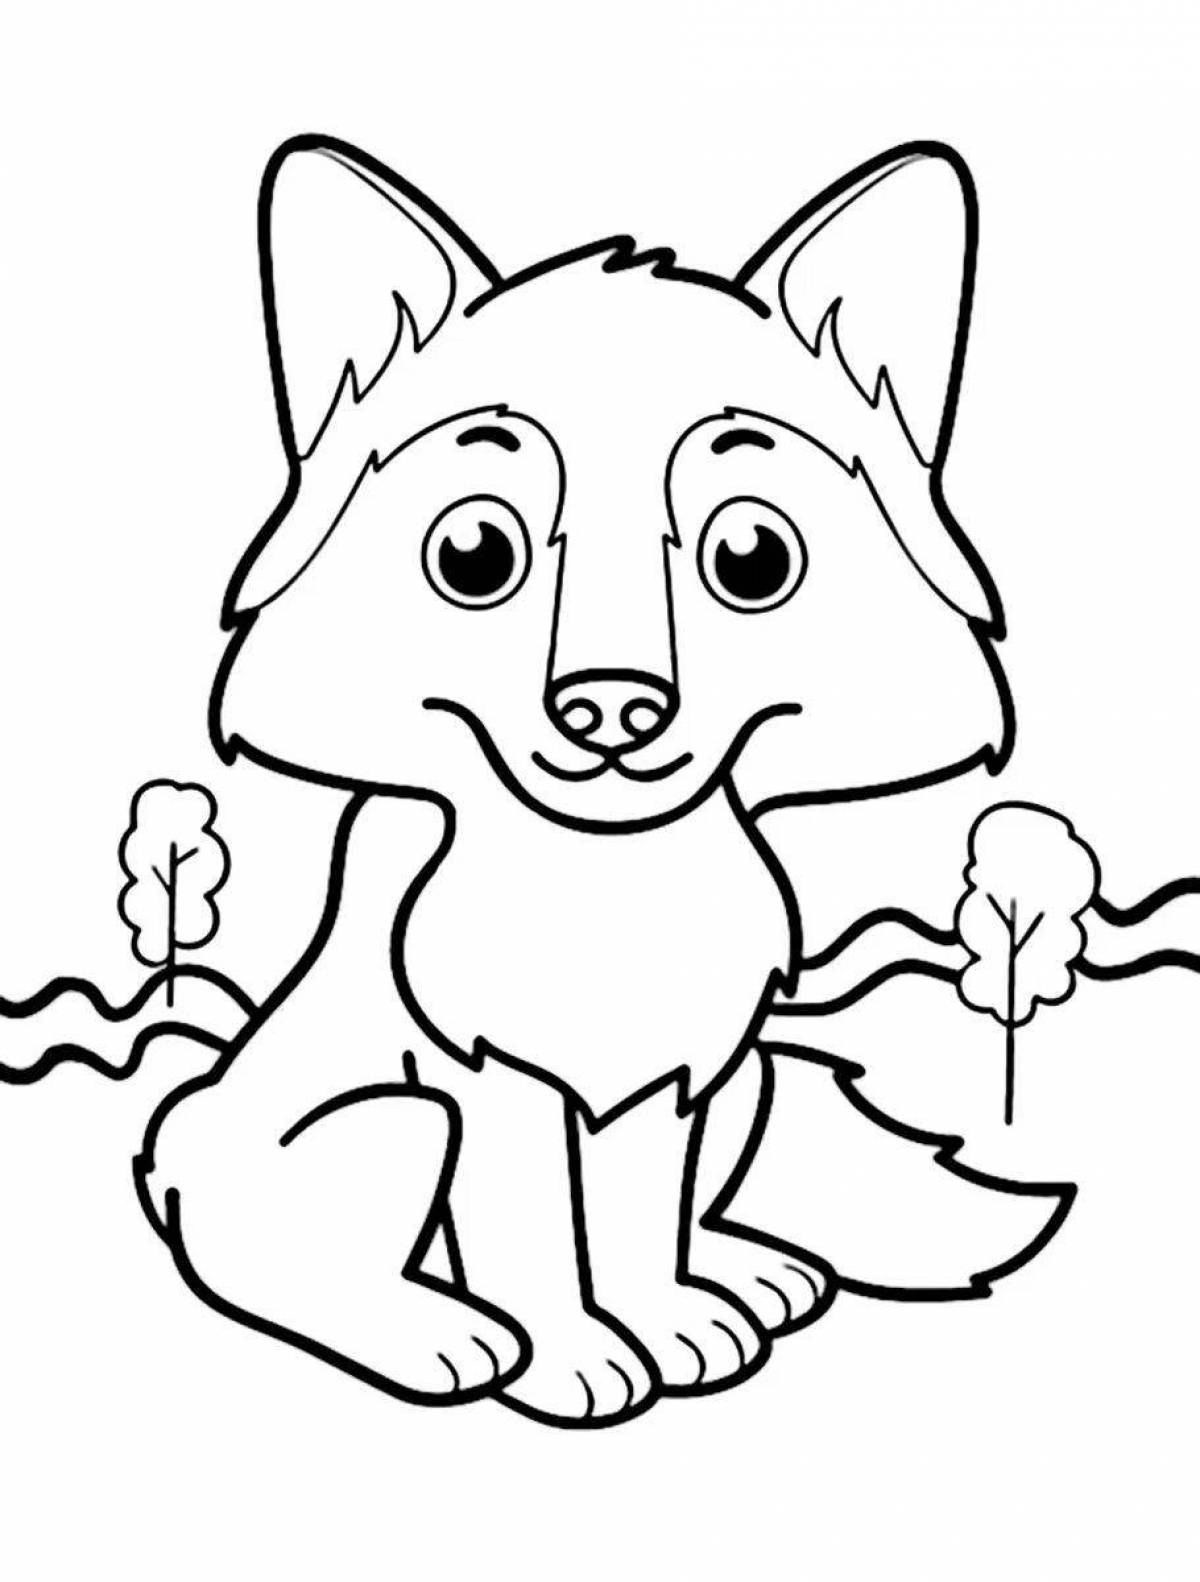 Holiday coloring fox for children 3-4 years old